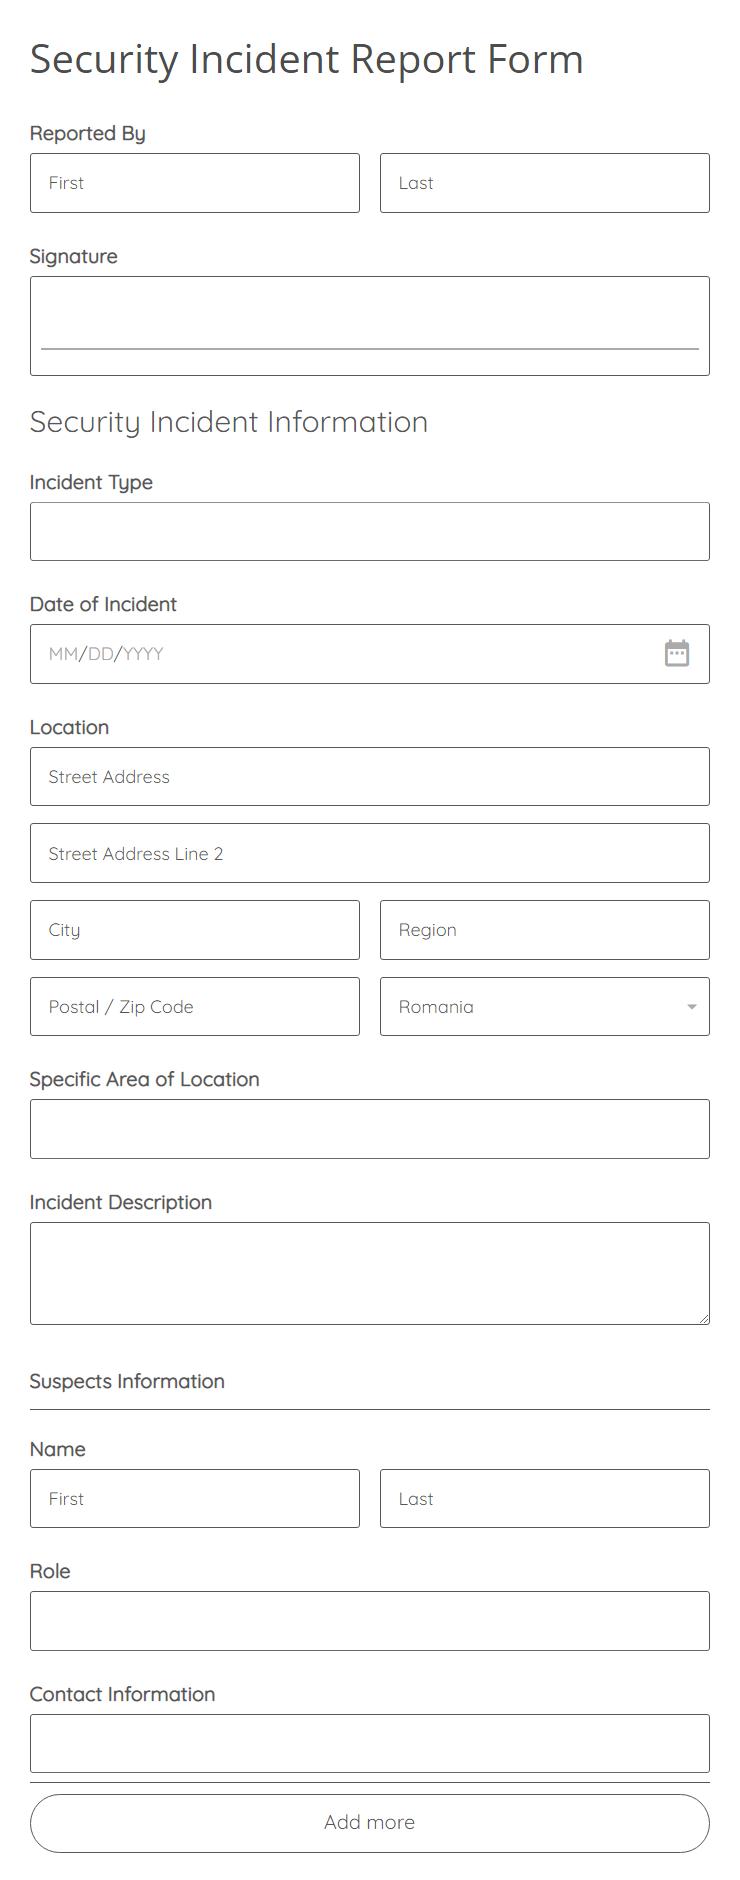 security-incident-report-form-template-123-form-builder